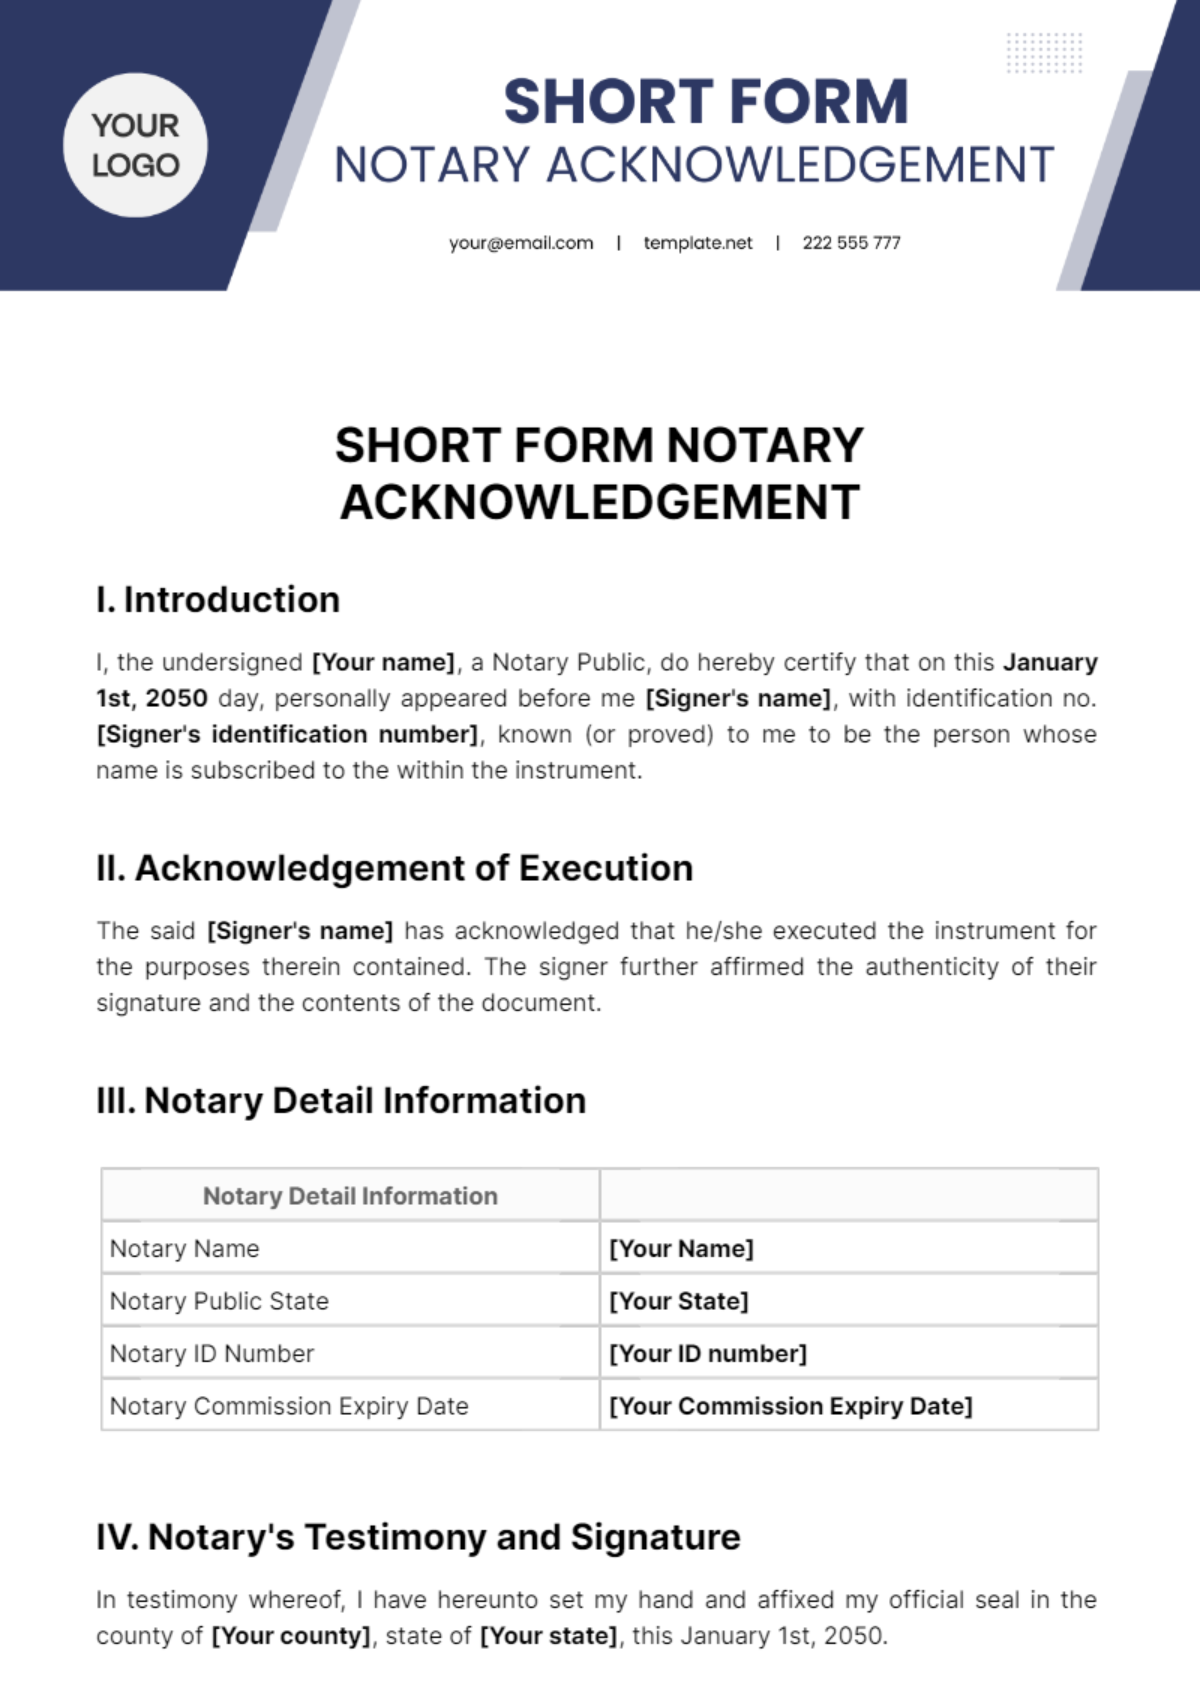 Short Form Notary Acknowledgement Template